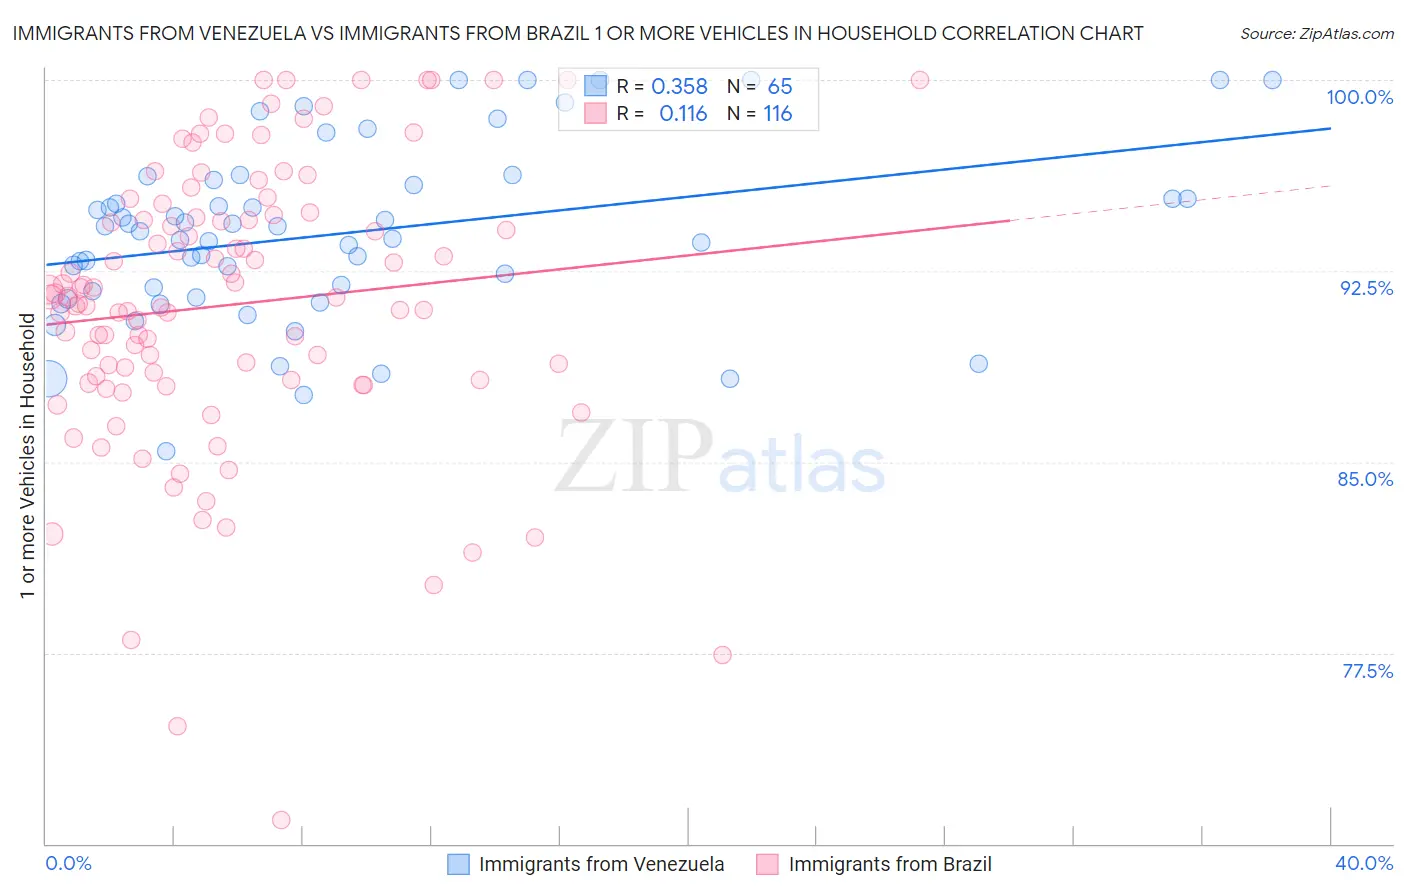 Immigrants from Venezuela vs Immigrants from Brazil 1 or more Vehicles in Household